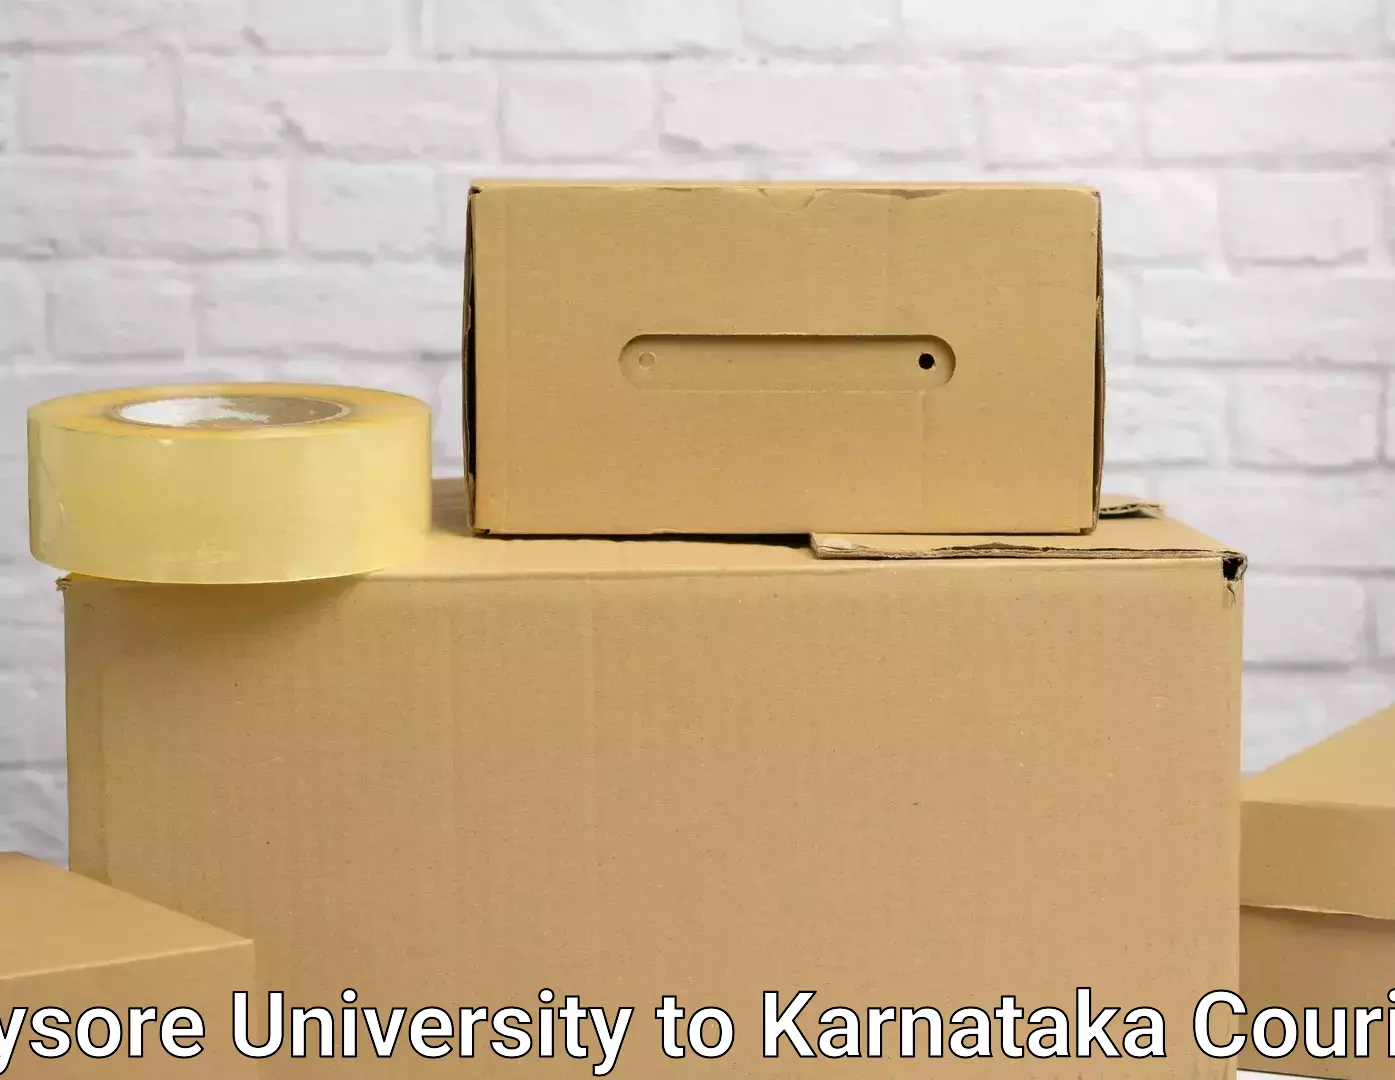 Trusted relocation experts Mysore University to Tiptur